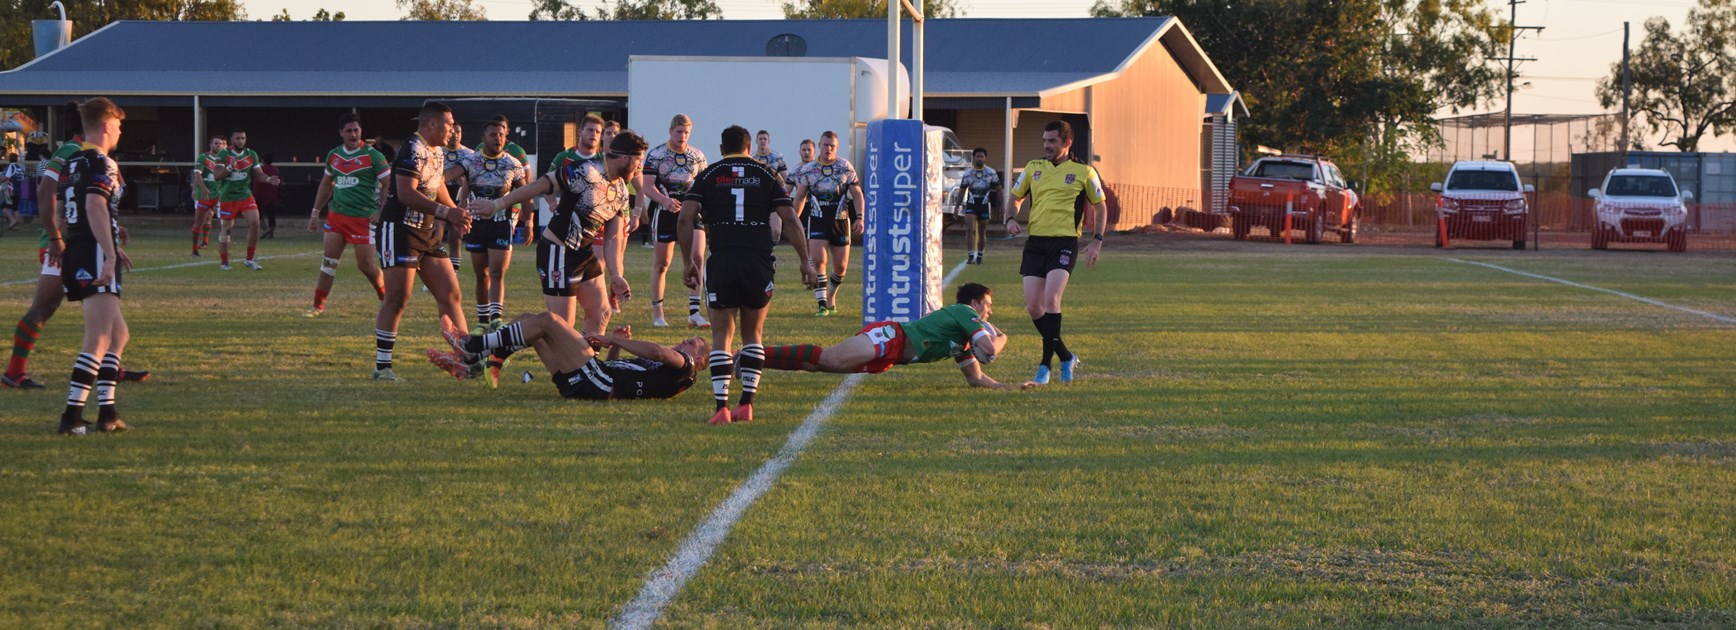 Wynnum Manly dent Magpies finals hopes